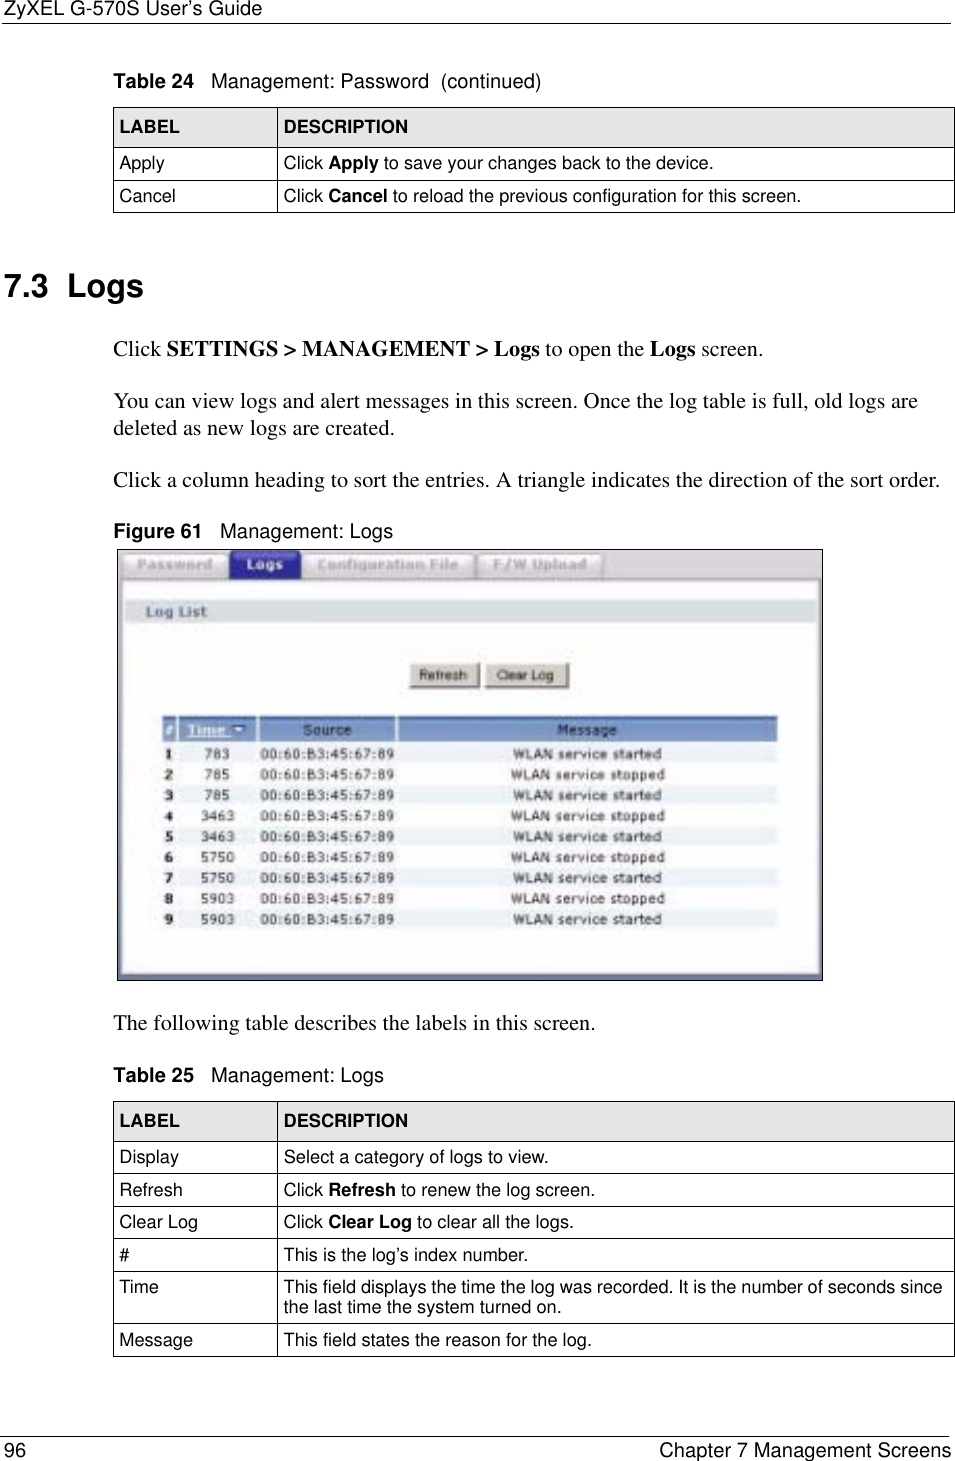 ZyXEL G-570S User’s Guide96 Chapter 7 Management Screens7.3  Logs Click SETTINGS &gt; MANAGEMENT &gt; Logs to open the Logs screen. You can view logs and alert messages in this screen. Once the log table is full, old logs are deleted as new logs are created.Click a column heading to sort the entries. A triangle indicates the direction of the sort order.Figure 61   Management: LogsThe following table describes the labels in this screen.Apply Click Apply to save your changes back to the device.Cancel Click Cancel to reload the previous configuration for this screen.Table 24   Management: Password  (continued)LABEL DESCRIPTIONTable 25   Management: Logs LABEL DESCRIPTIONDisplay  Select a category of logs to view.Refresh Click Refresh to renew the log screen.Clear Log  Click Clear Log to clear all the logs. # This is the log’s index number.Time  This field displays the time the log was recorded. It is the number of seconds since the last time the system turned on.Message This field states the reason for the log.